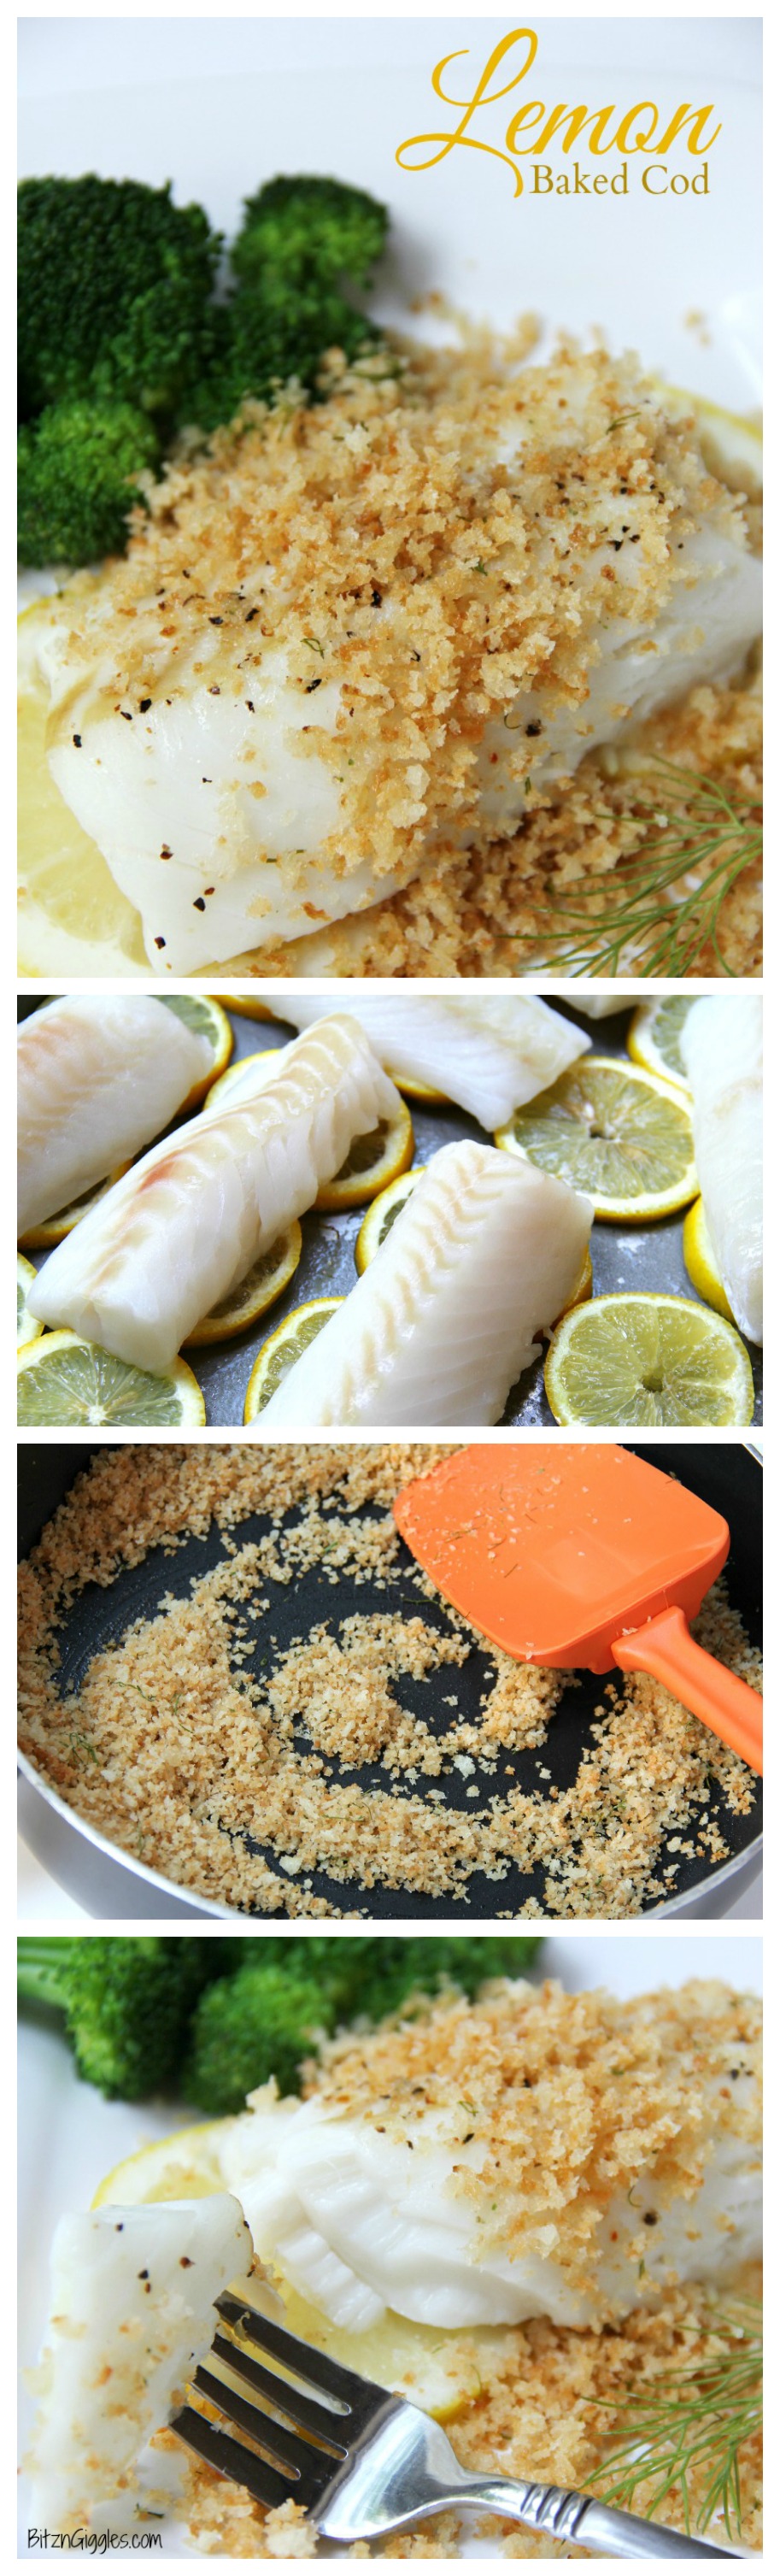 Lemon Baked Cod - Flaky white cod baked on top of lemon slices and then topped off with panko crumbs. . . bursting with flavors of lemon and dill.